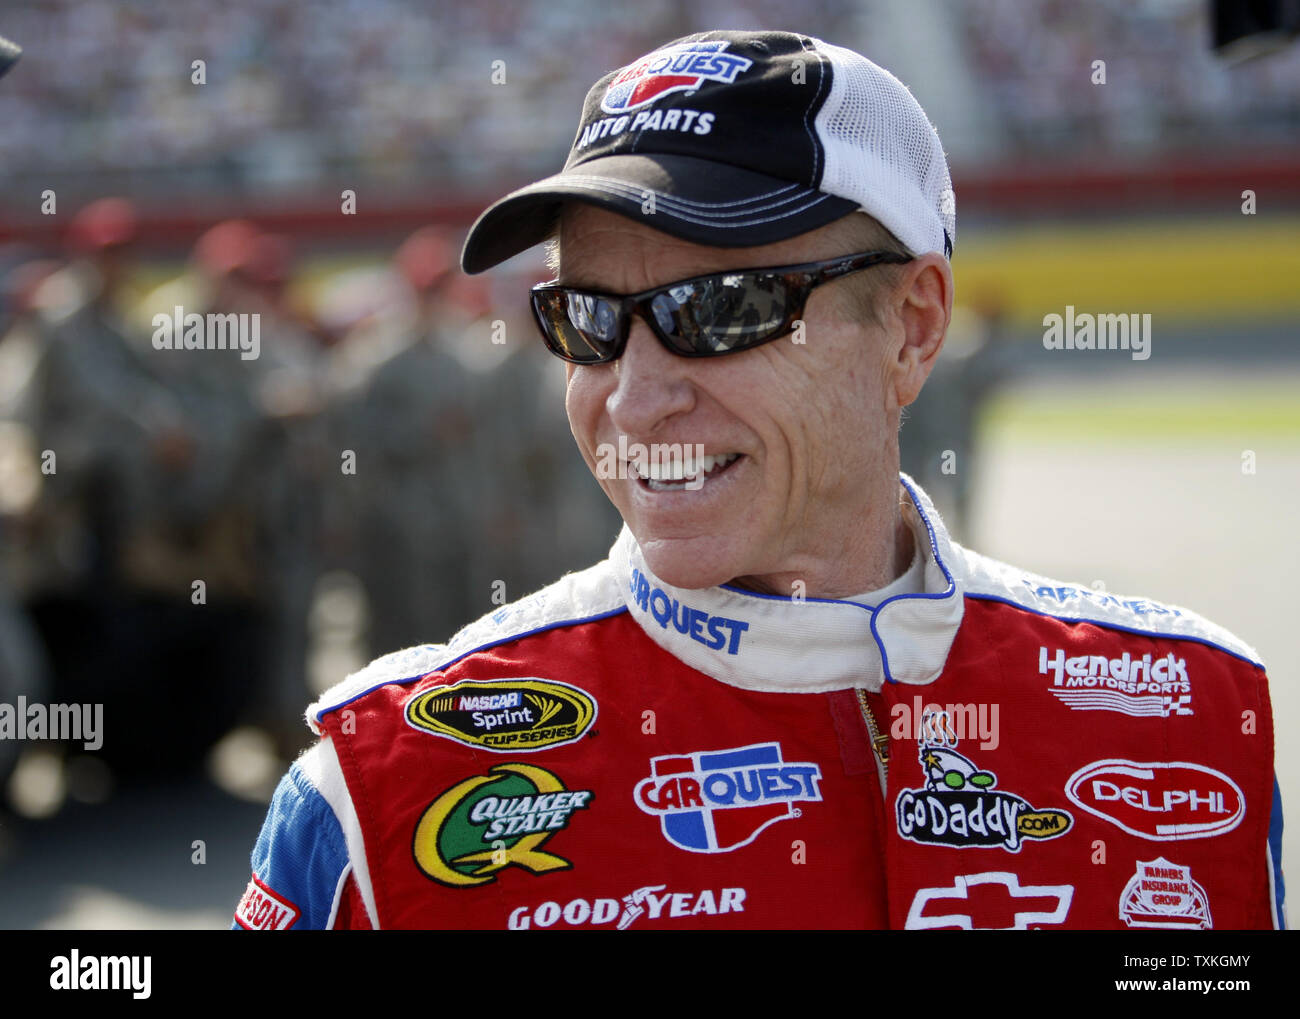 Race car driver Mark Martin before the NASCAR Coca-Cola 600 Race at the Charlotte Motor Speedway in Concord, North Carolina on May 29, 2011.    UPI/Nell Redmond . Stock Photo